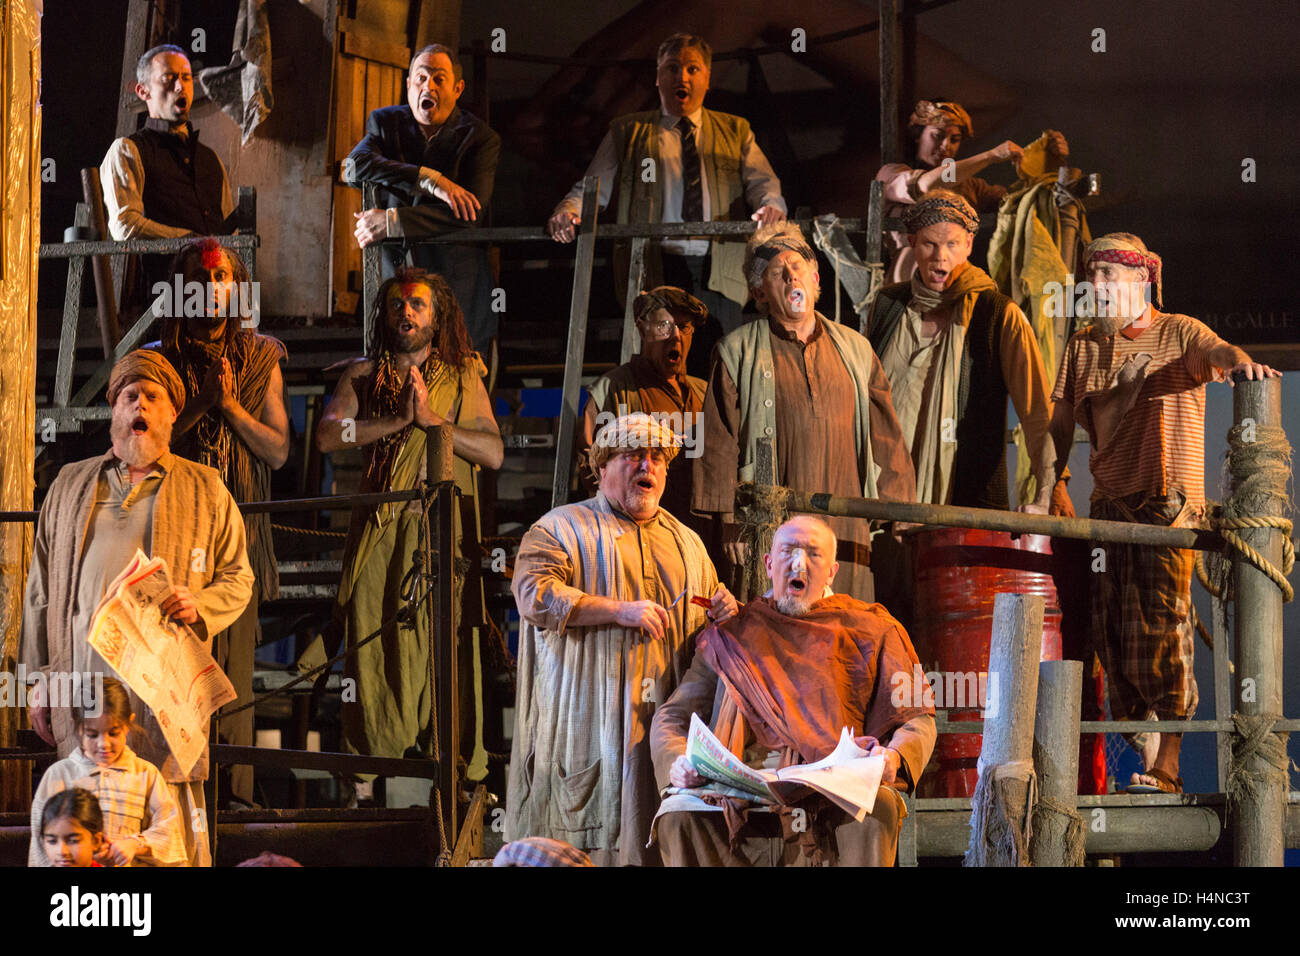 London, UK. 18 October 2016. Pictured: member of the chorus. Penny Woolcock's production of The Pearl Fishers by Georges Bizet returns to the ENO with 10 performances from 19 October to 2 December 2016. With Jacques Imbrailo as Zurga, Robert McPherson as Nadir, Claudia Boyle as Leila and James Creswell as Nourabad. Set design by Dick Bird, conductor Roland Böer. Stock Photo